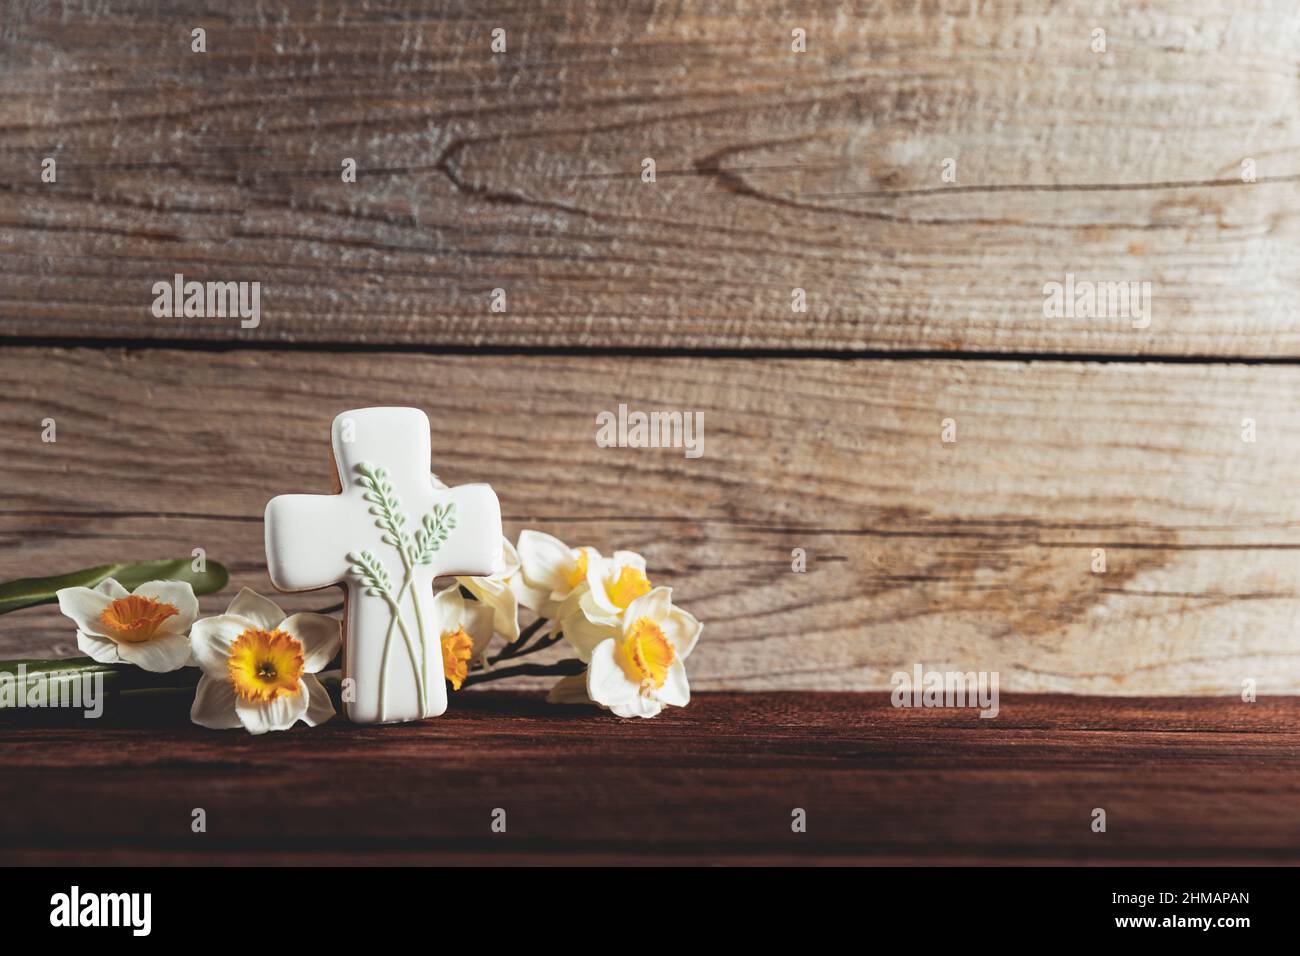 Easter holiday conceptual background on rustic wooden boards. Photo of gingerbread cookie Cross shape, narcissus or daffodils flowers on table top. Card with copy space to place text. Minimal concept Stock Photo